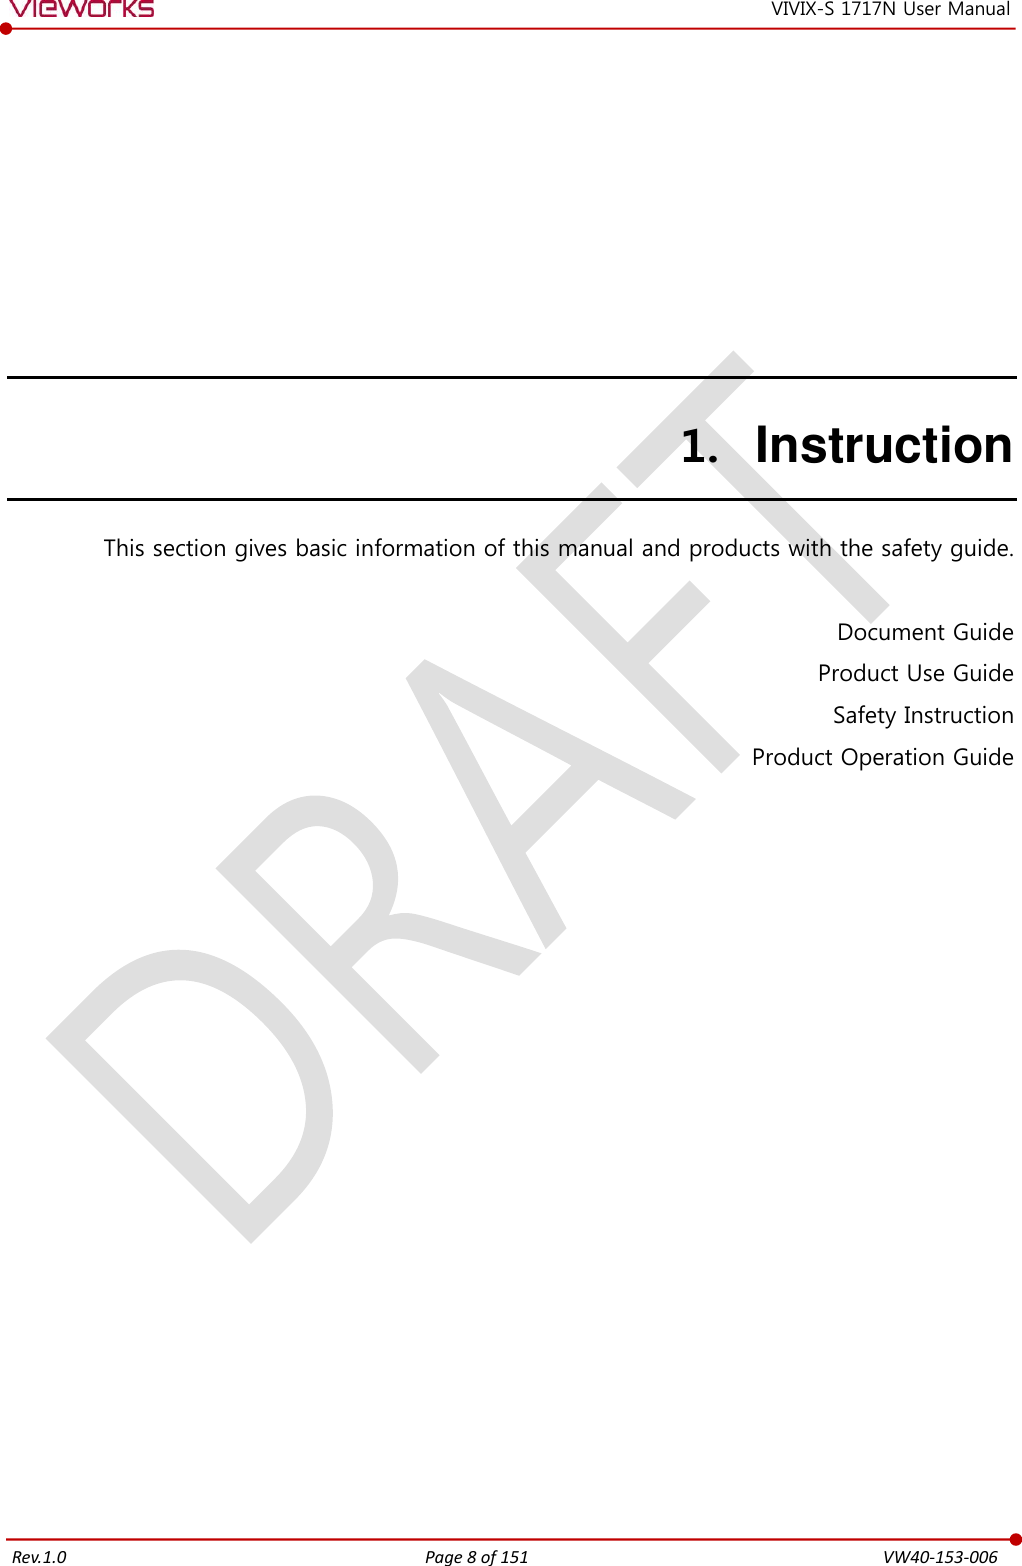   Rev.1.0 Page 8 of 151  VW40-153-006 VIVIX-S 1717N User Manual 1. Instruction This section gives basic information of this manual and products with the safety guide.  Document Guide Product Use Guide Safety Instruction Product Operation Guide  